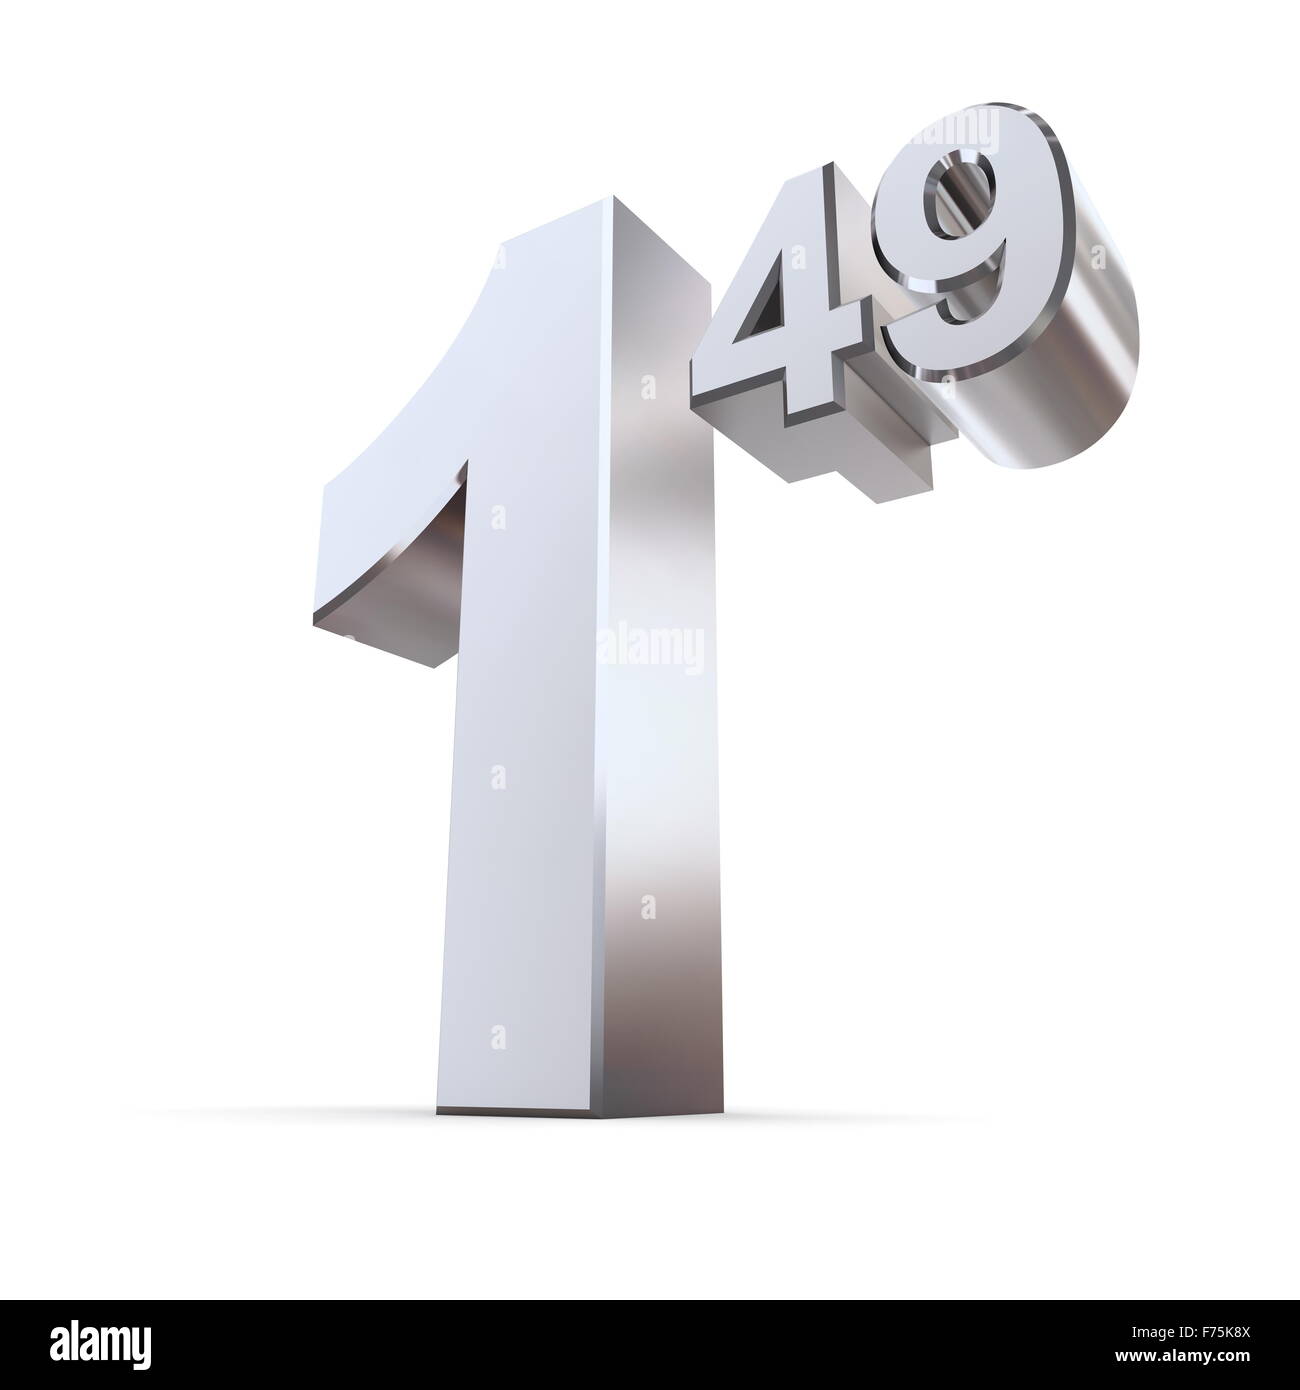 Solid Price Tag Number 1.49 - Shiny Silver-Chrome Stock Photo